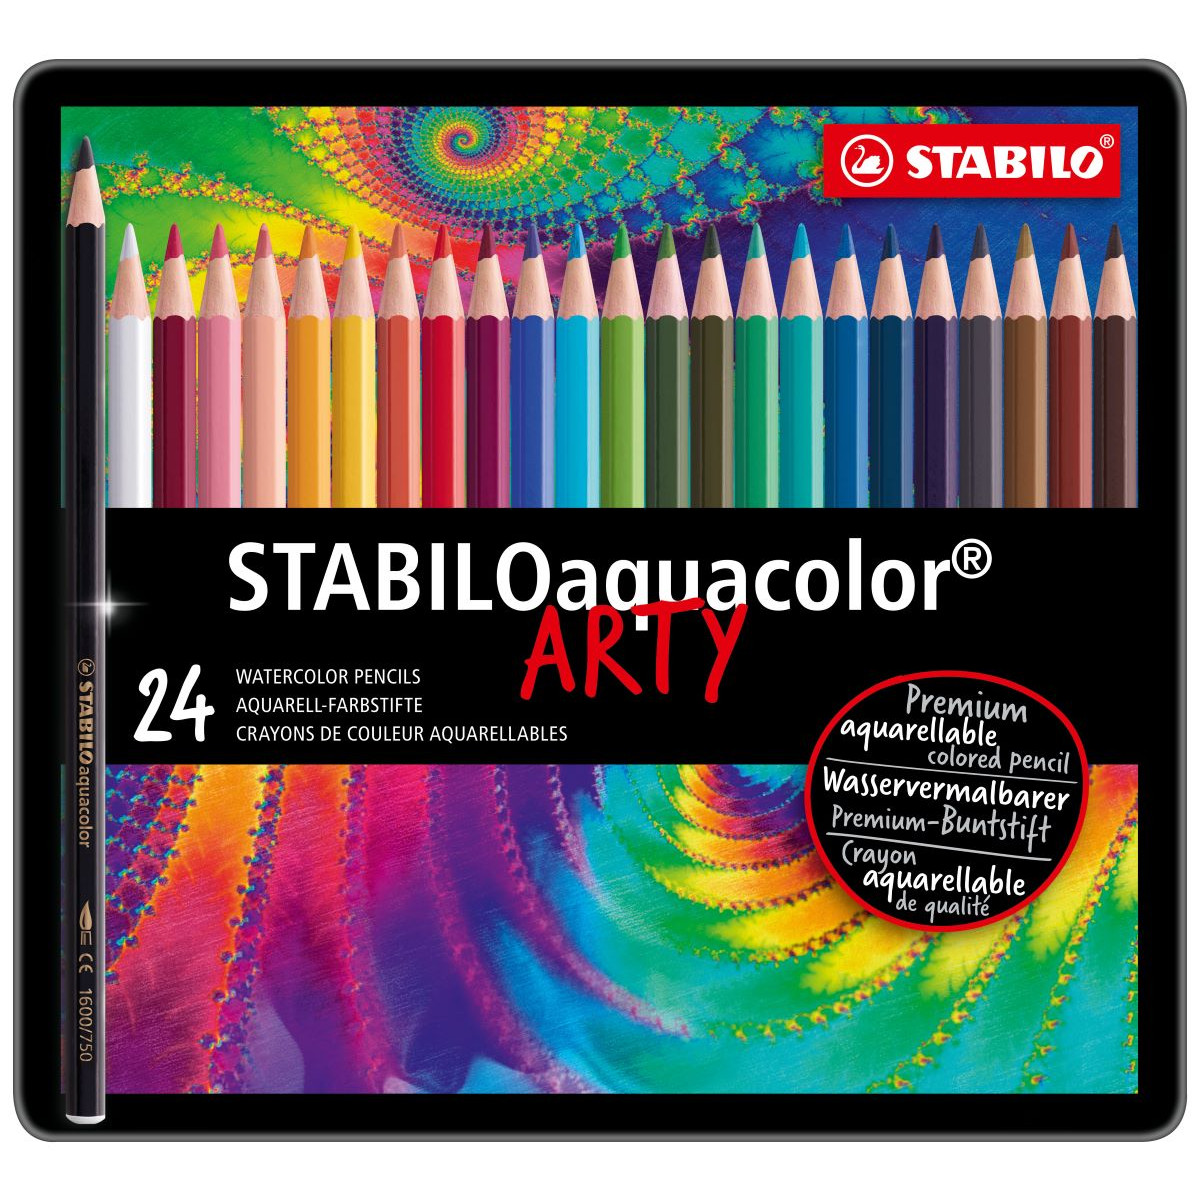 STABILOaquacolor Colouring Pencil - ARTY -Tin of 24 - Assorted Colours